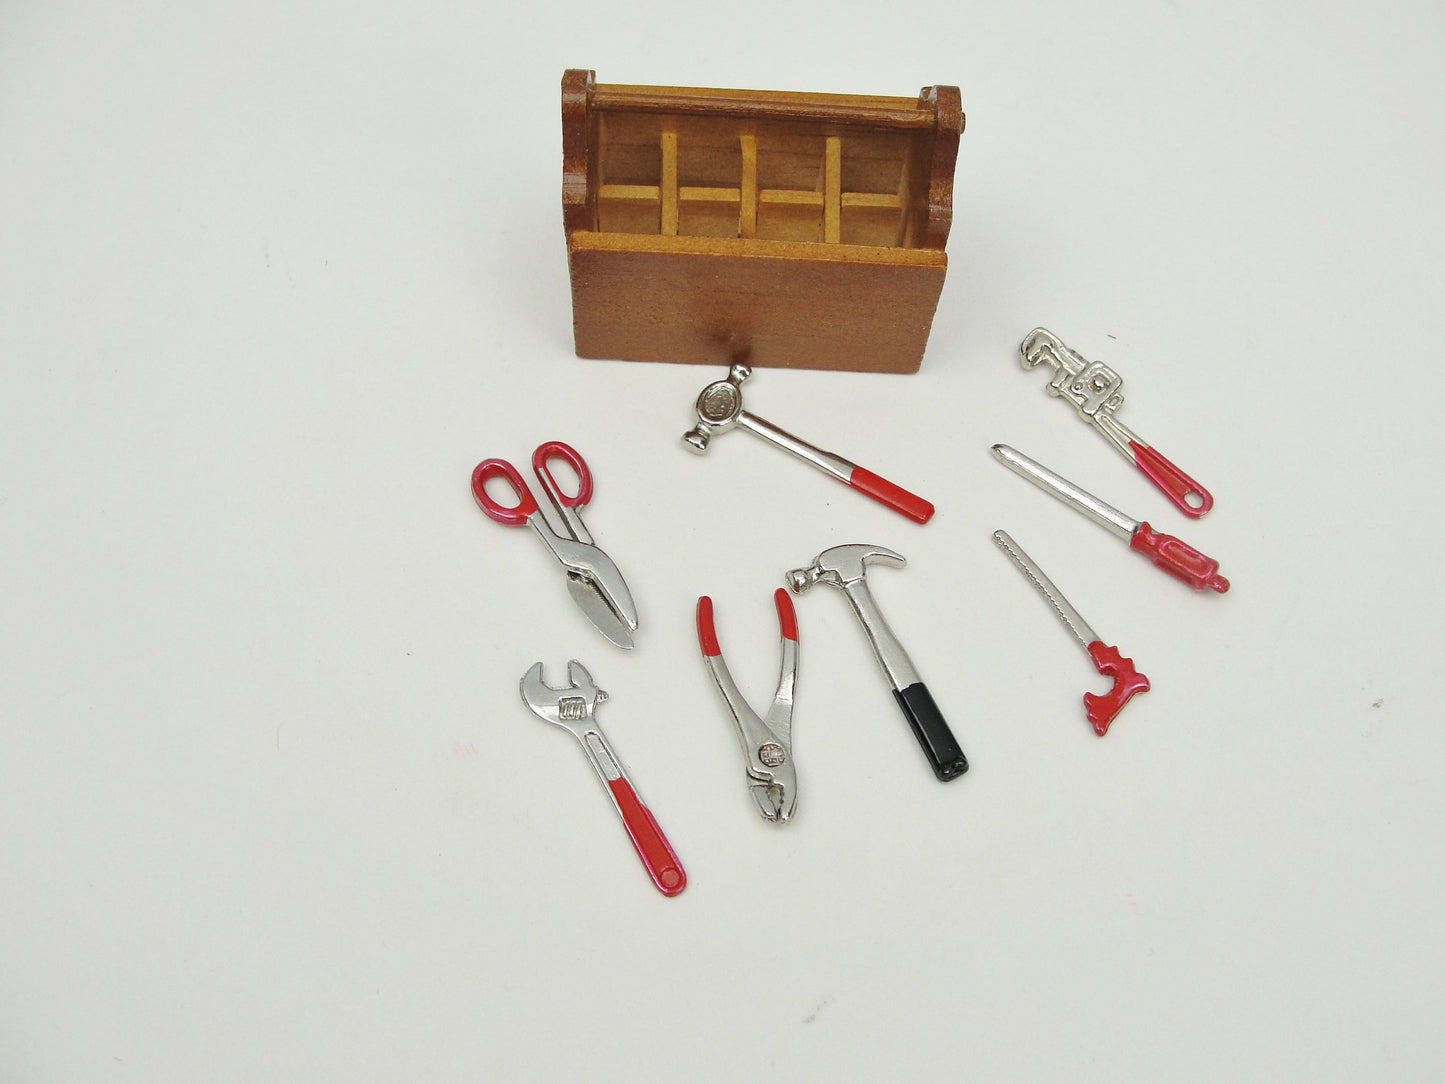 Dollhouse miniature tool box and tools - Miniatures - Craft Supply House